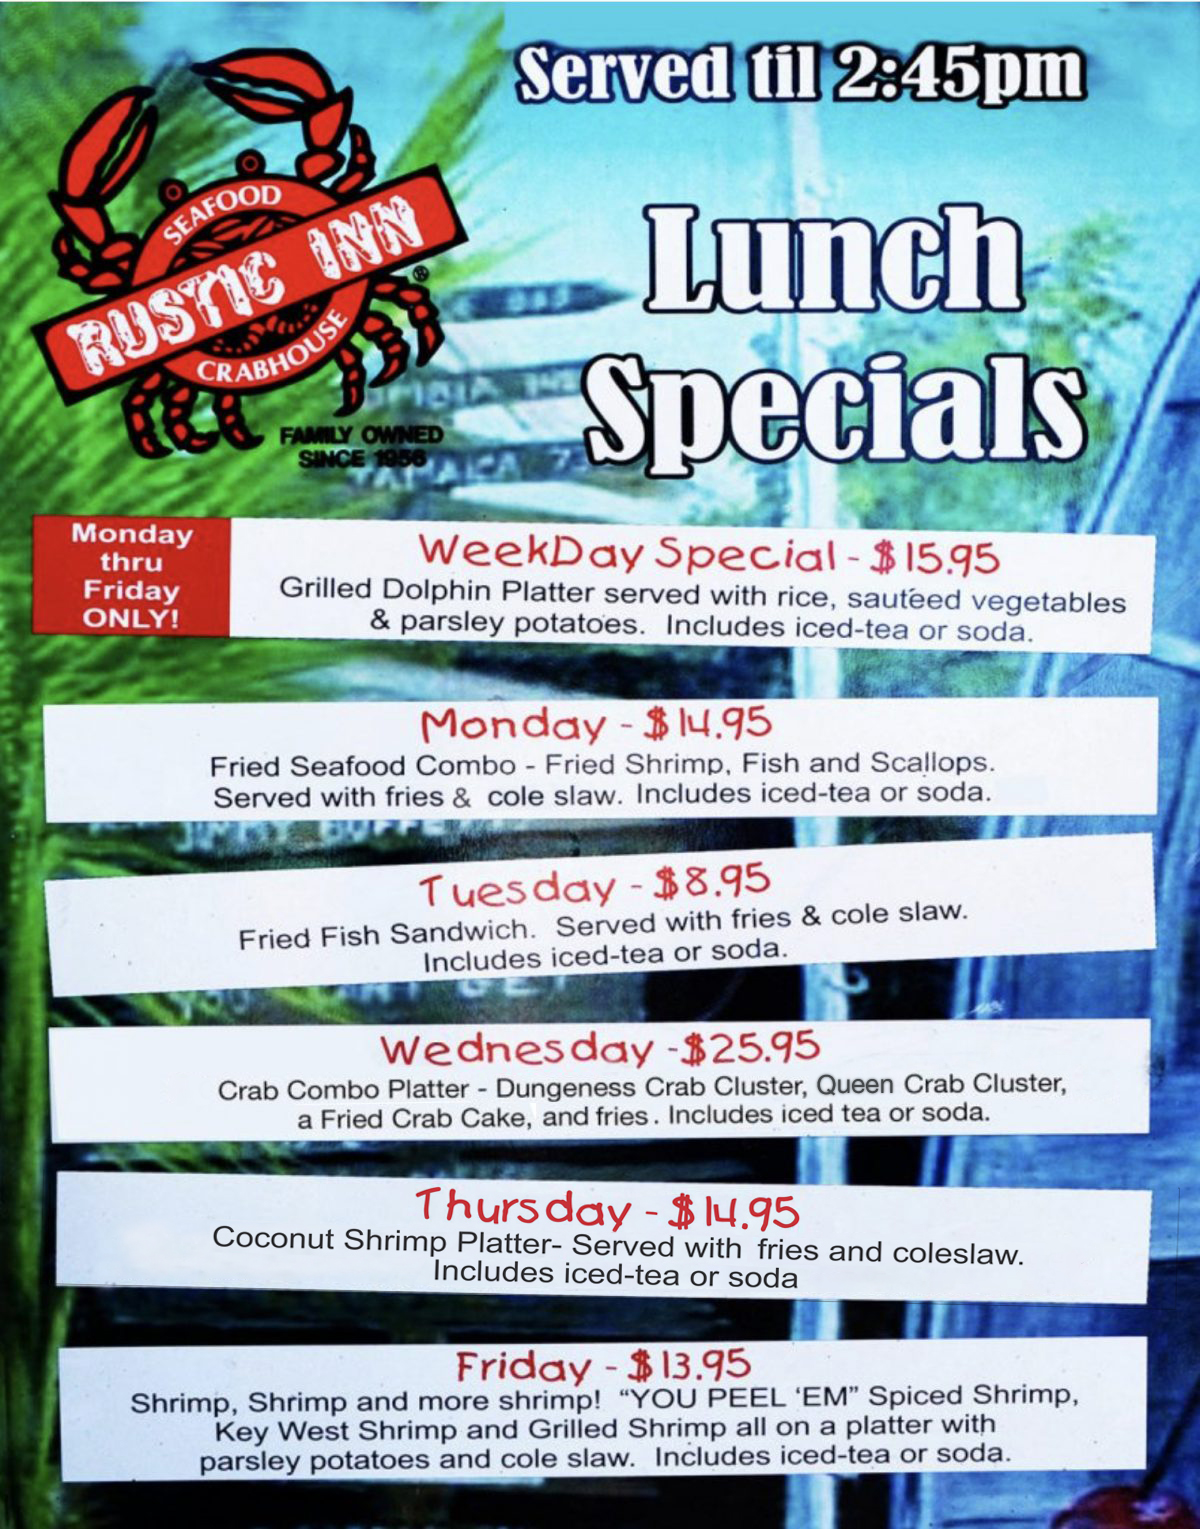 Rustic Inn Lunch Specials Monday through Friday